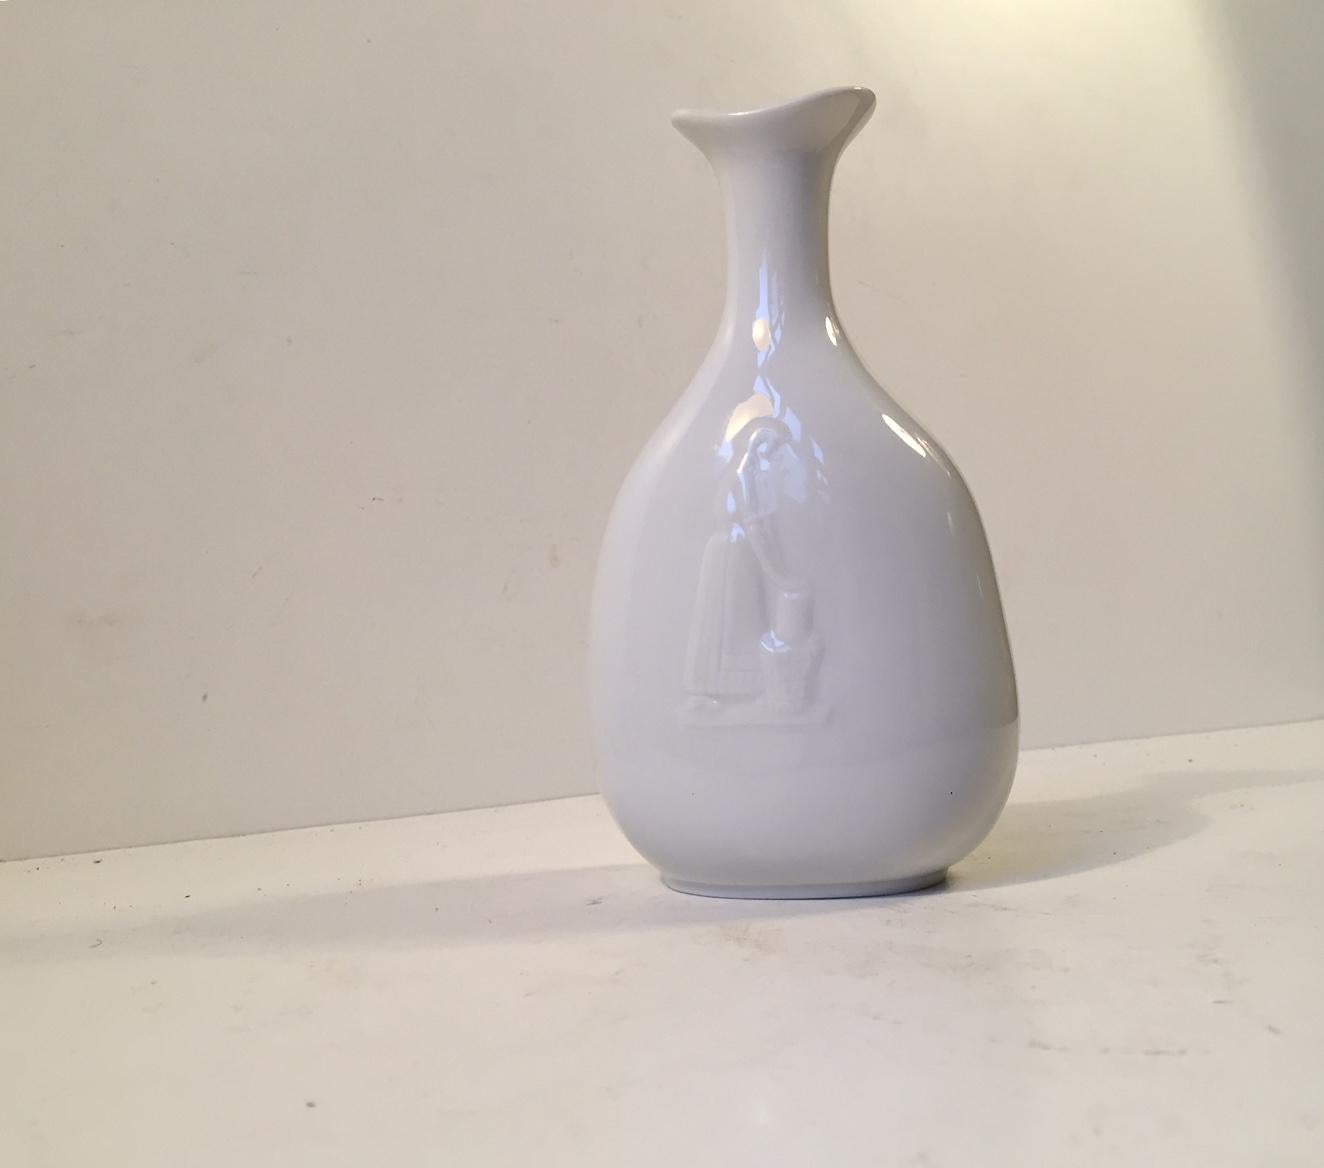 A Blanc de Chine vase design by Swedish ceramist Gunnar Nylund for Hellerupis (Hellerup Ice Cream) in Denmark. The front depicts a woman making ice cream. This vase was made as a commercial gift in a relatively limited amount and only in Denmark in